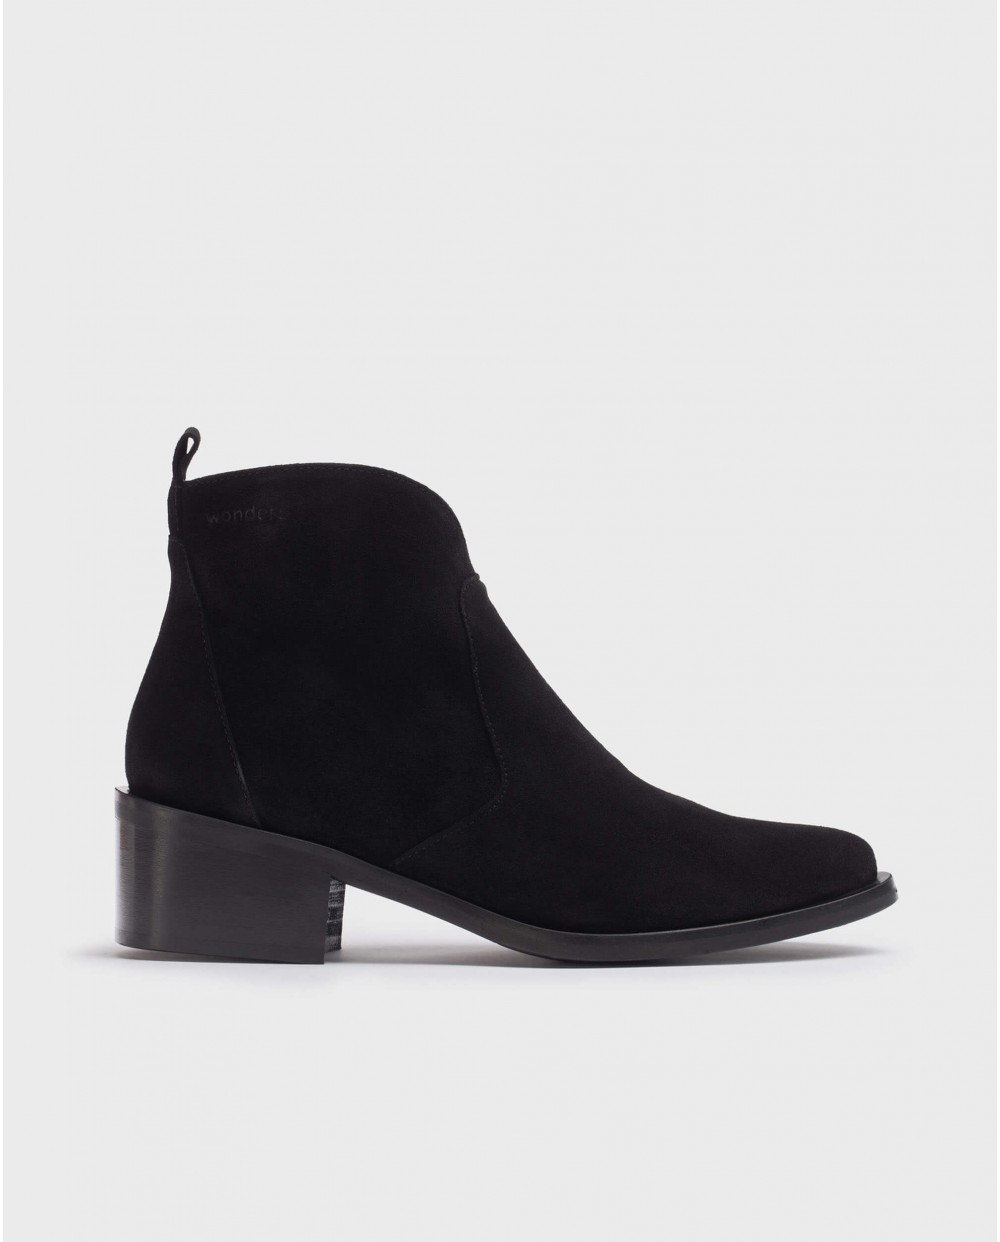 Wonders-Ankle Boots-Black Halley ankle boot